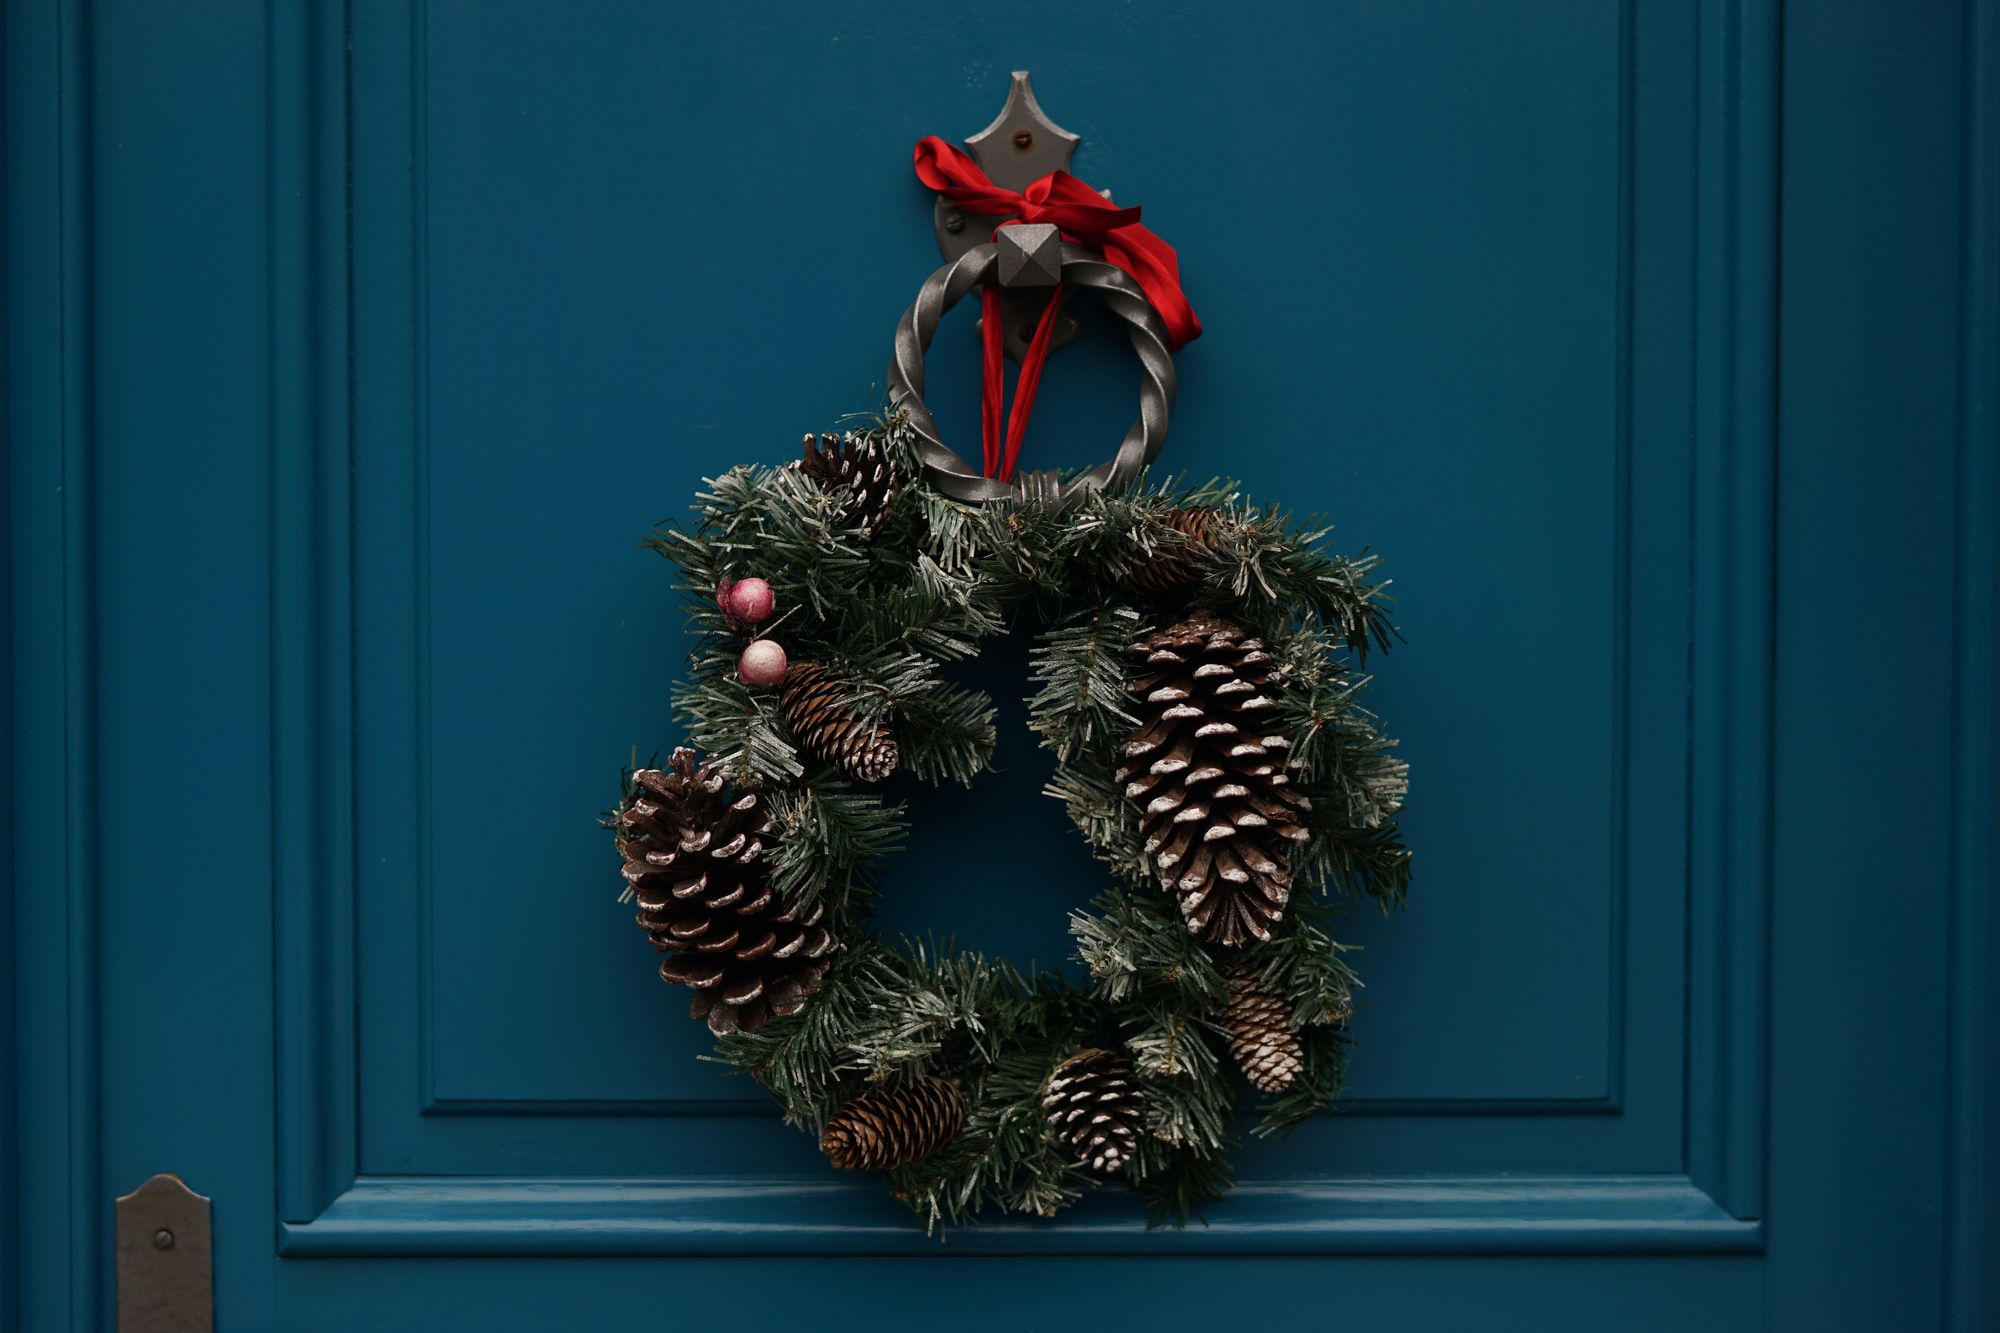 6 Reasons to Buy a Home During The Holidays